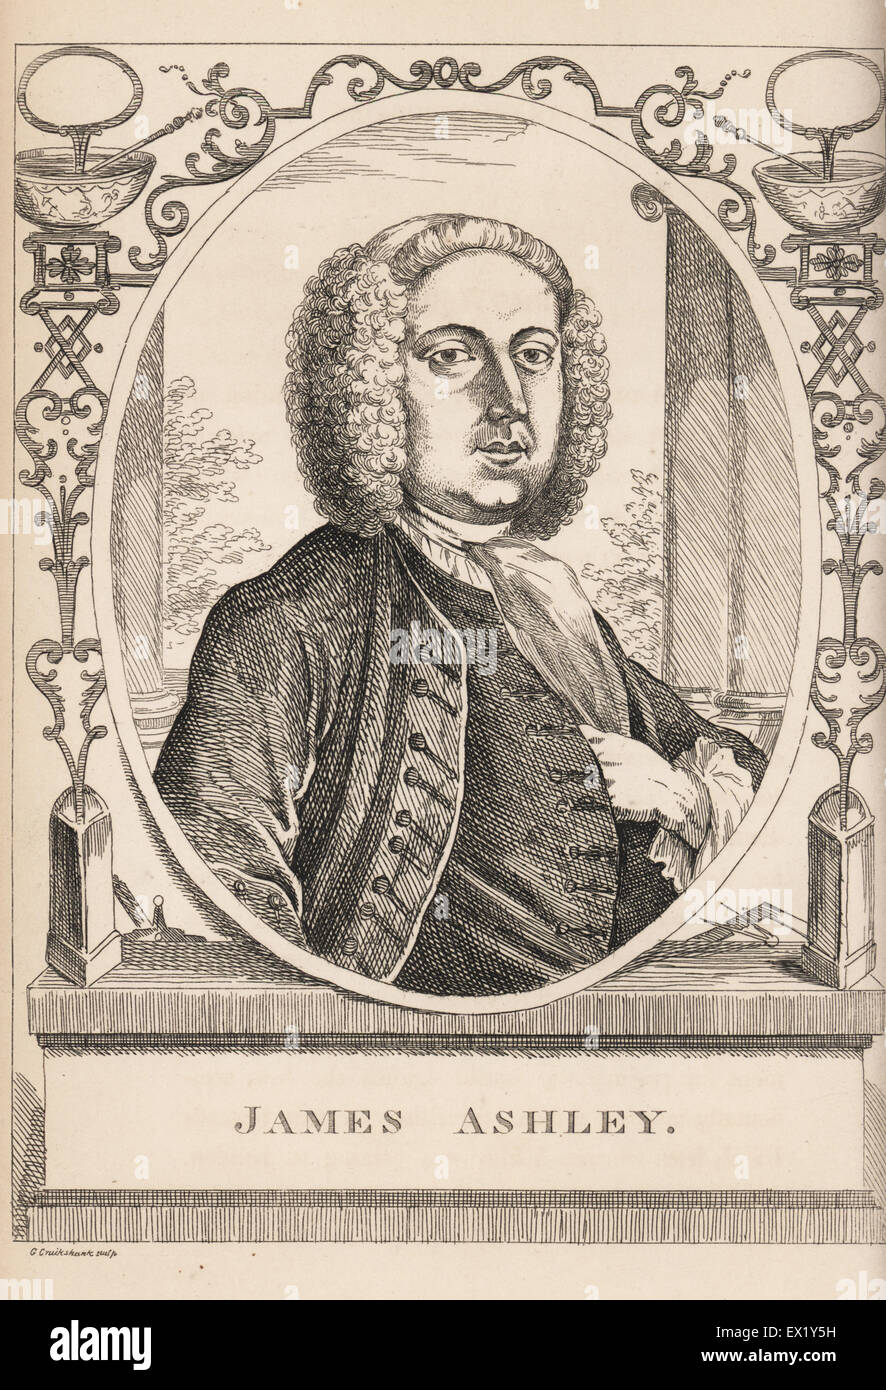 James Ashley, keeper of a punch house and brandy merchant. Copperplate engraving after George Cruikshank from John Caulfield's Portraits, Memoirs and Characters of Remarkable Persons, Young, London, 1819. Stock Photo